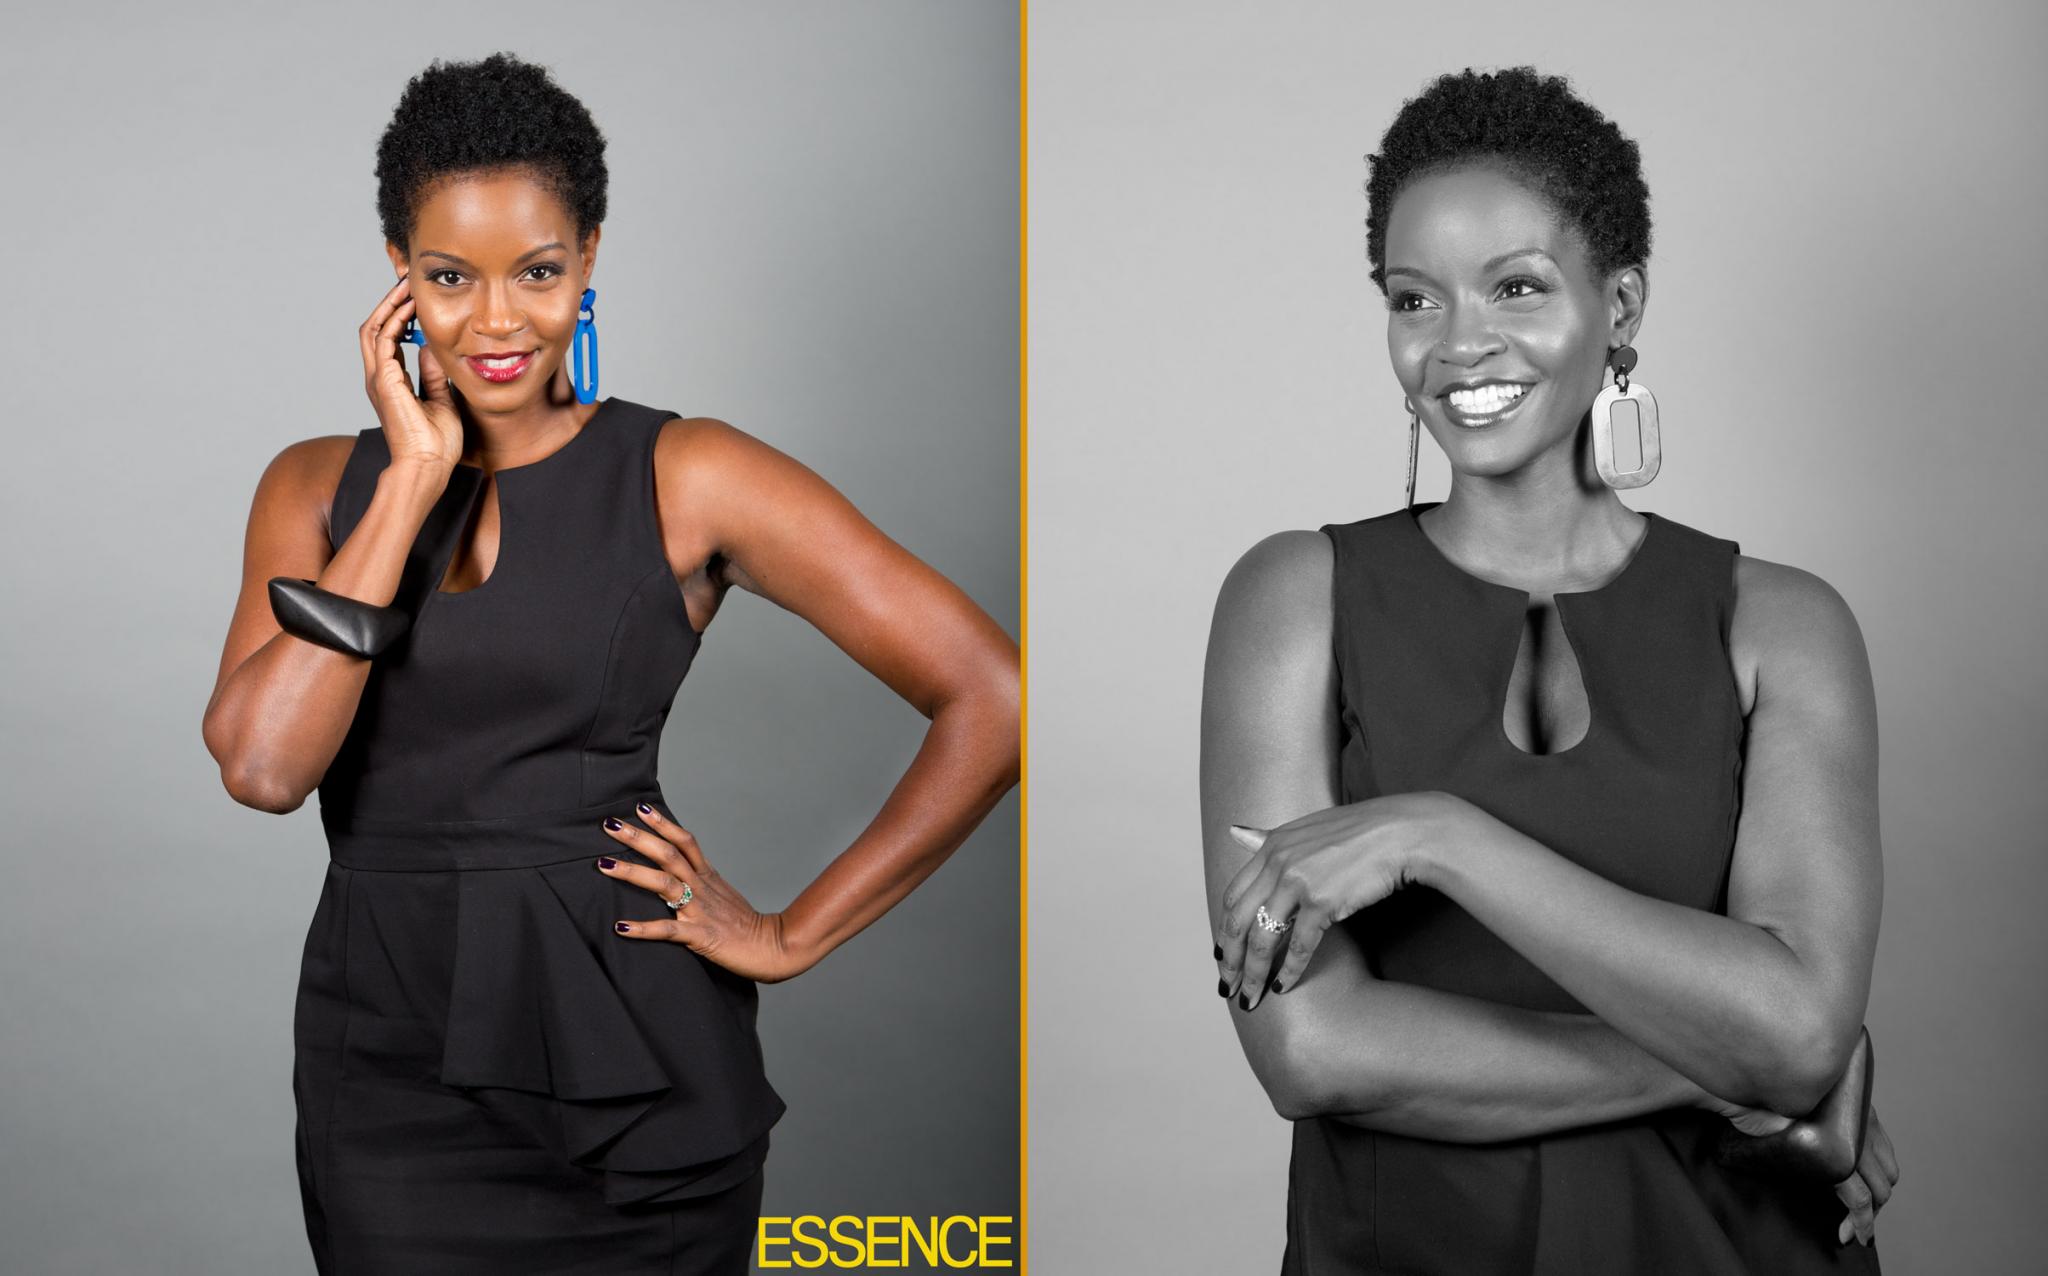 Star Portraits From Last Year's #EssenceFest Photo Booth